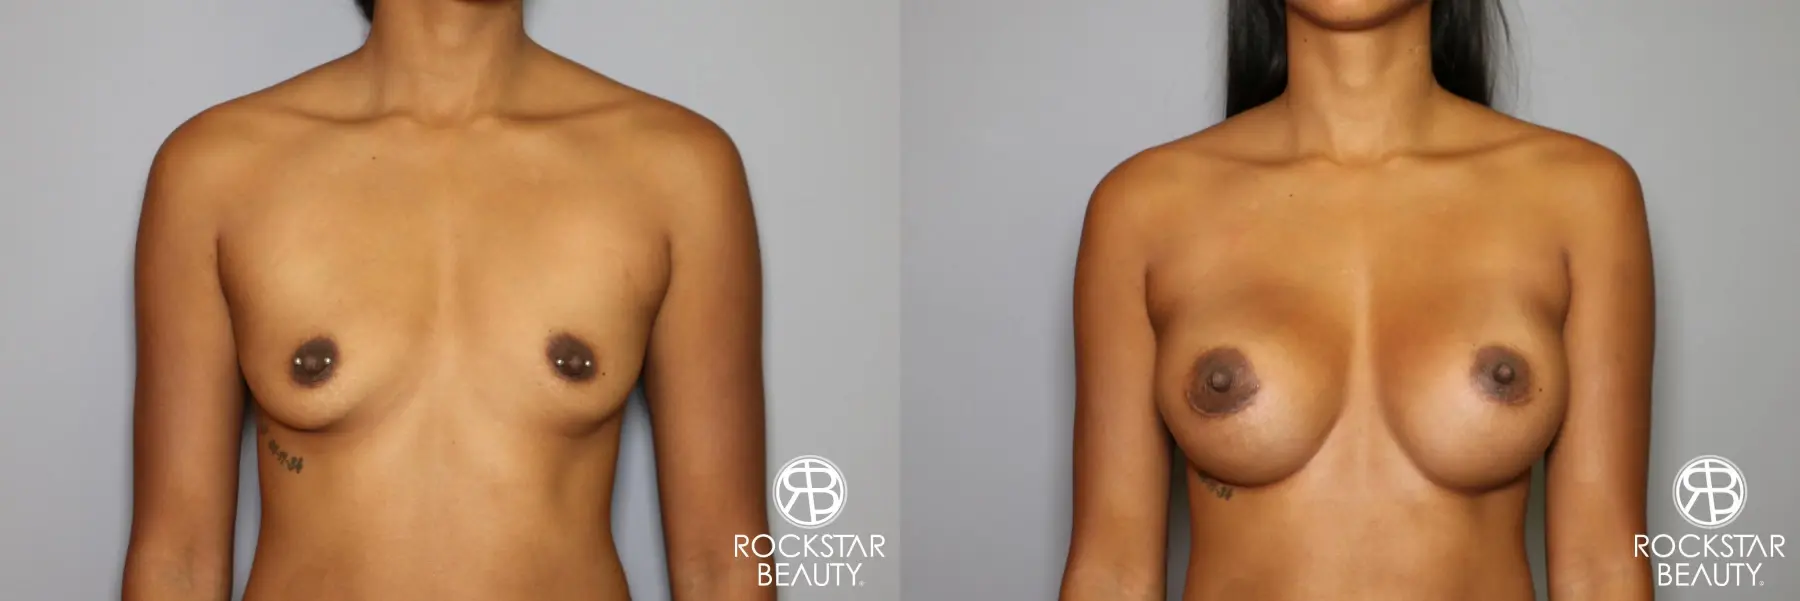 Breast Augmentation: Patient 14 - Before and After 1